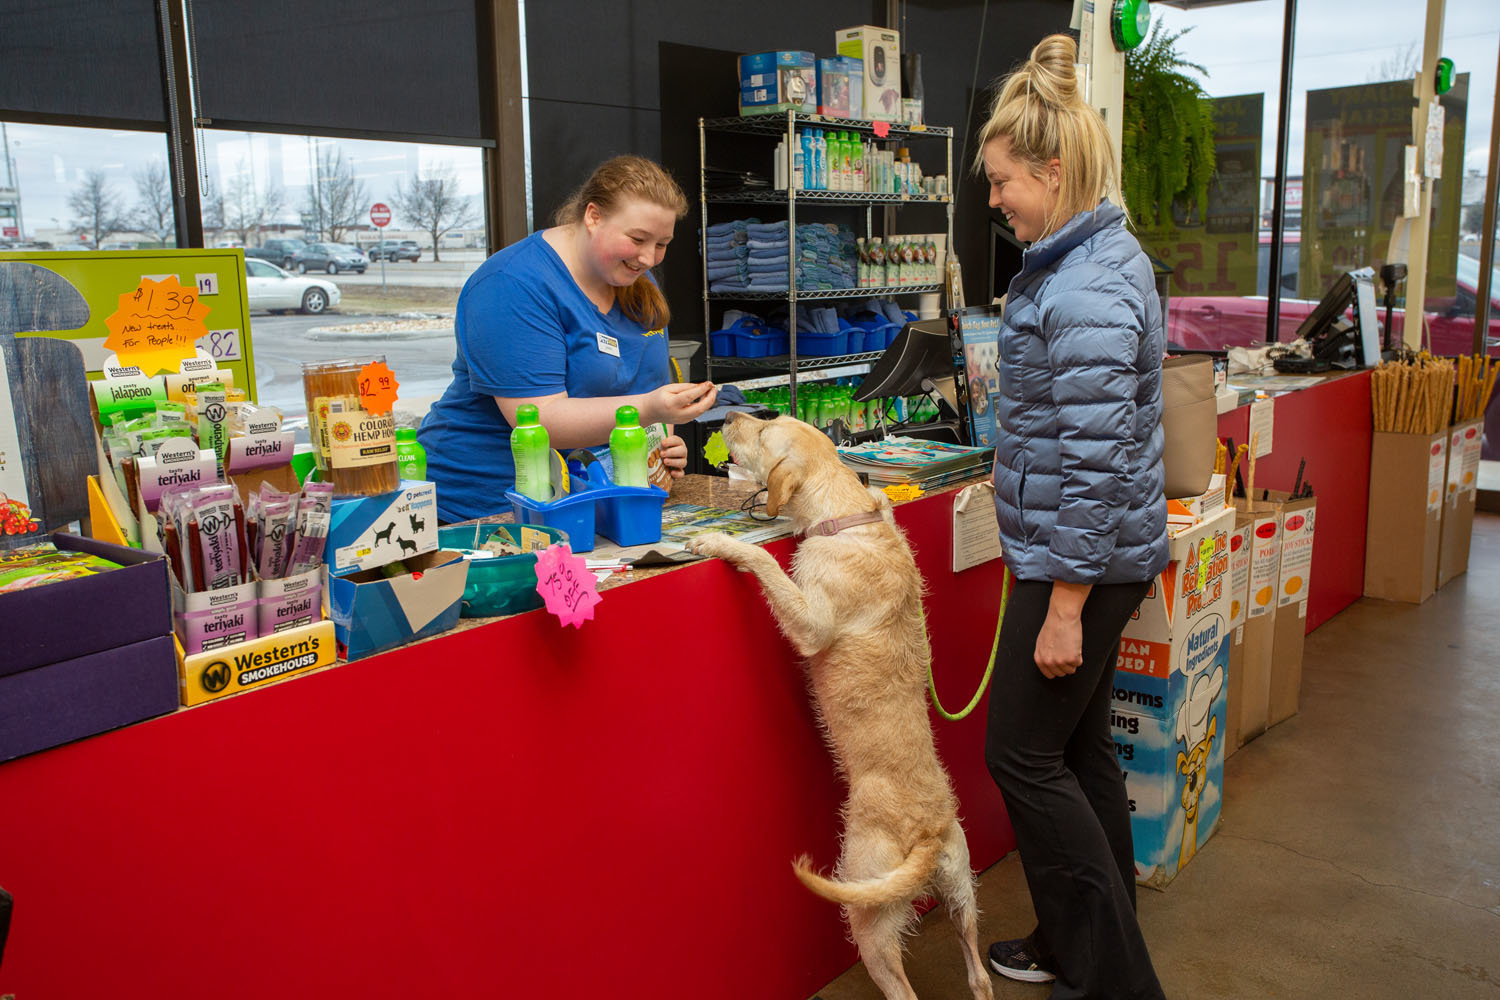 A Petsway employee serves a customer in early 2020 at the pet retailer's Glenstone Avenue store.